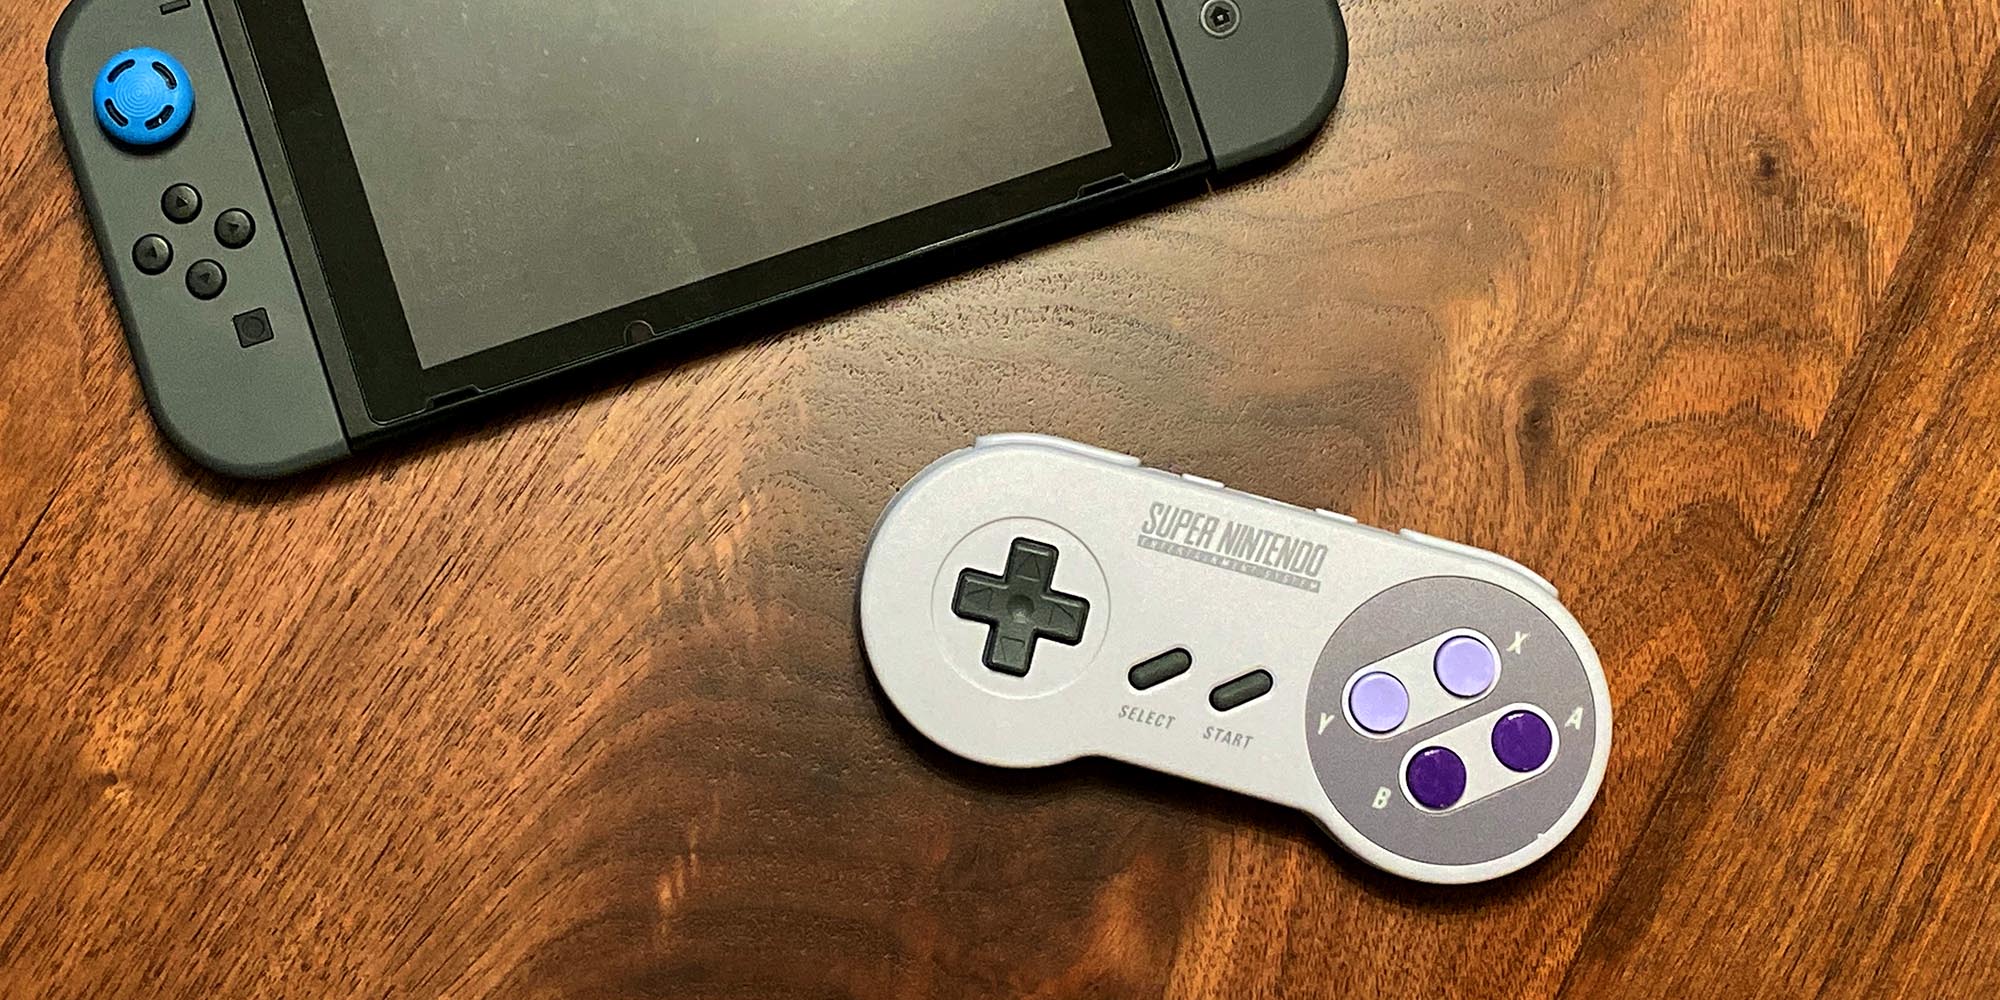 where to buy snes switch controller